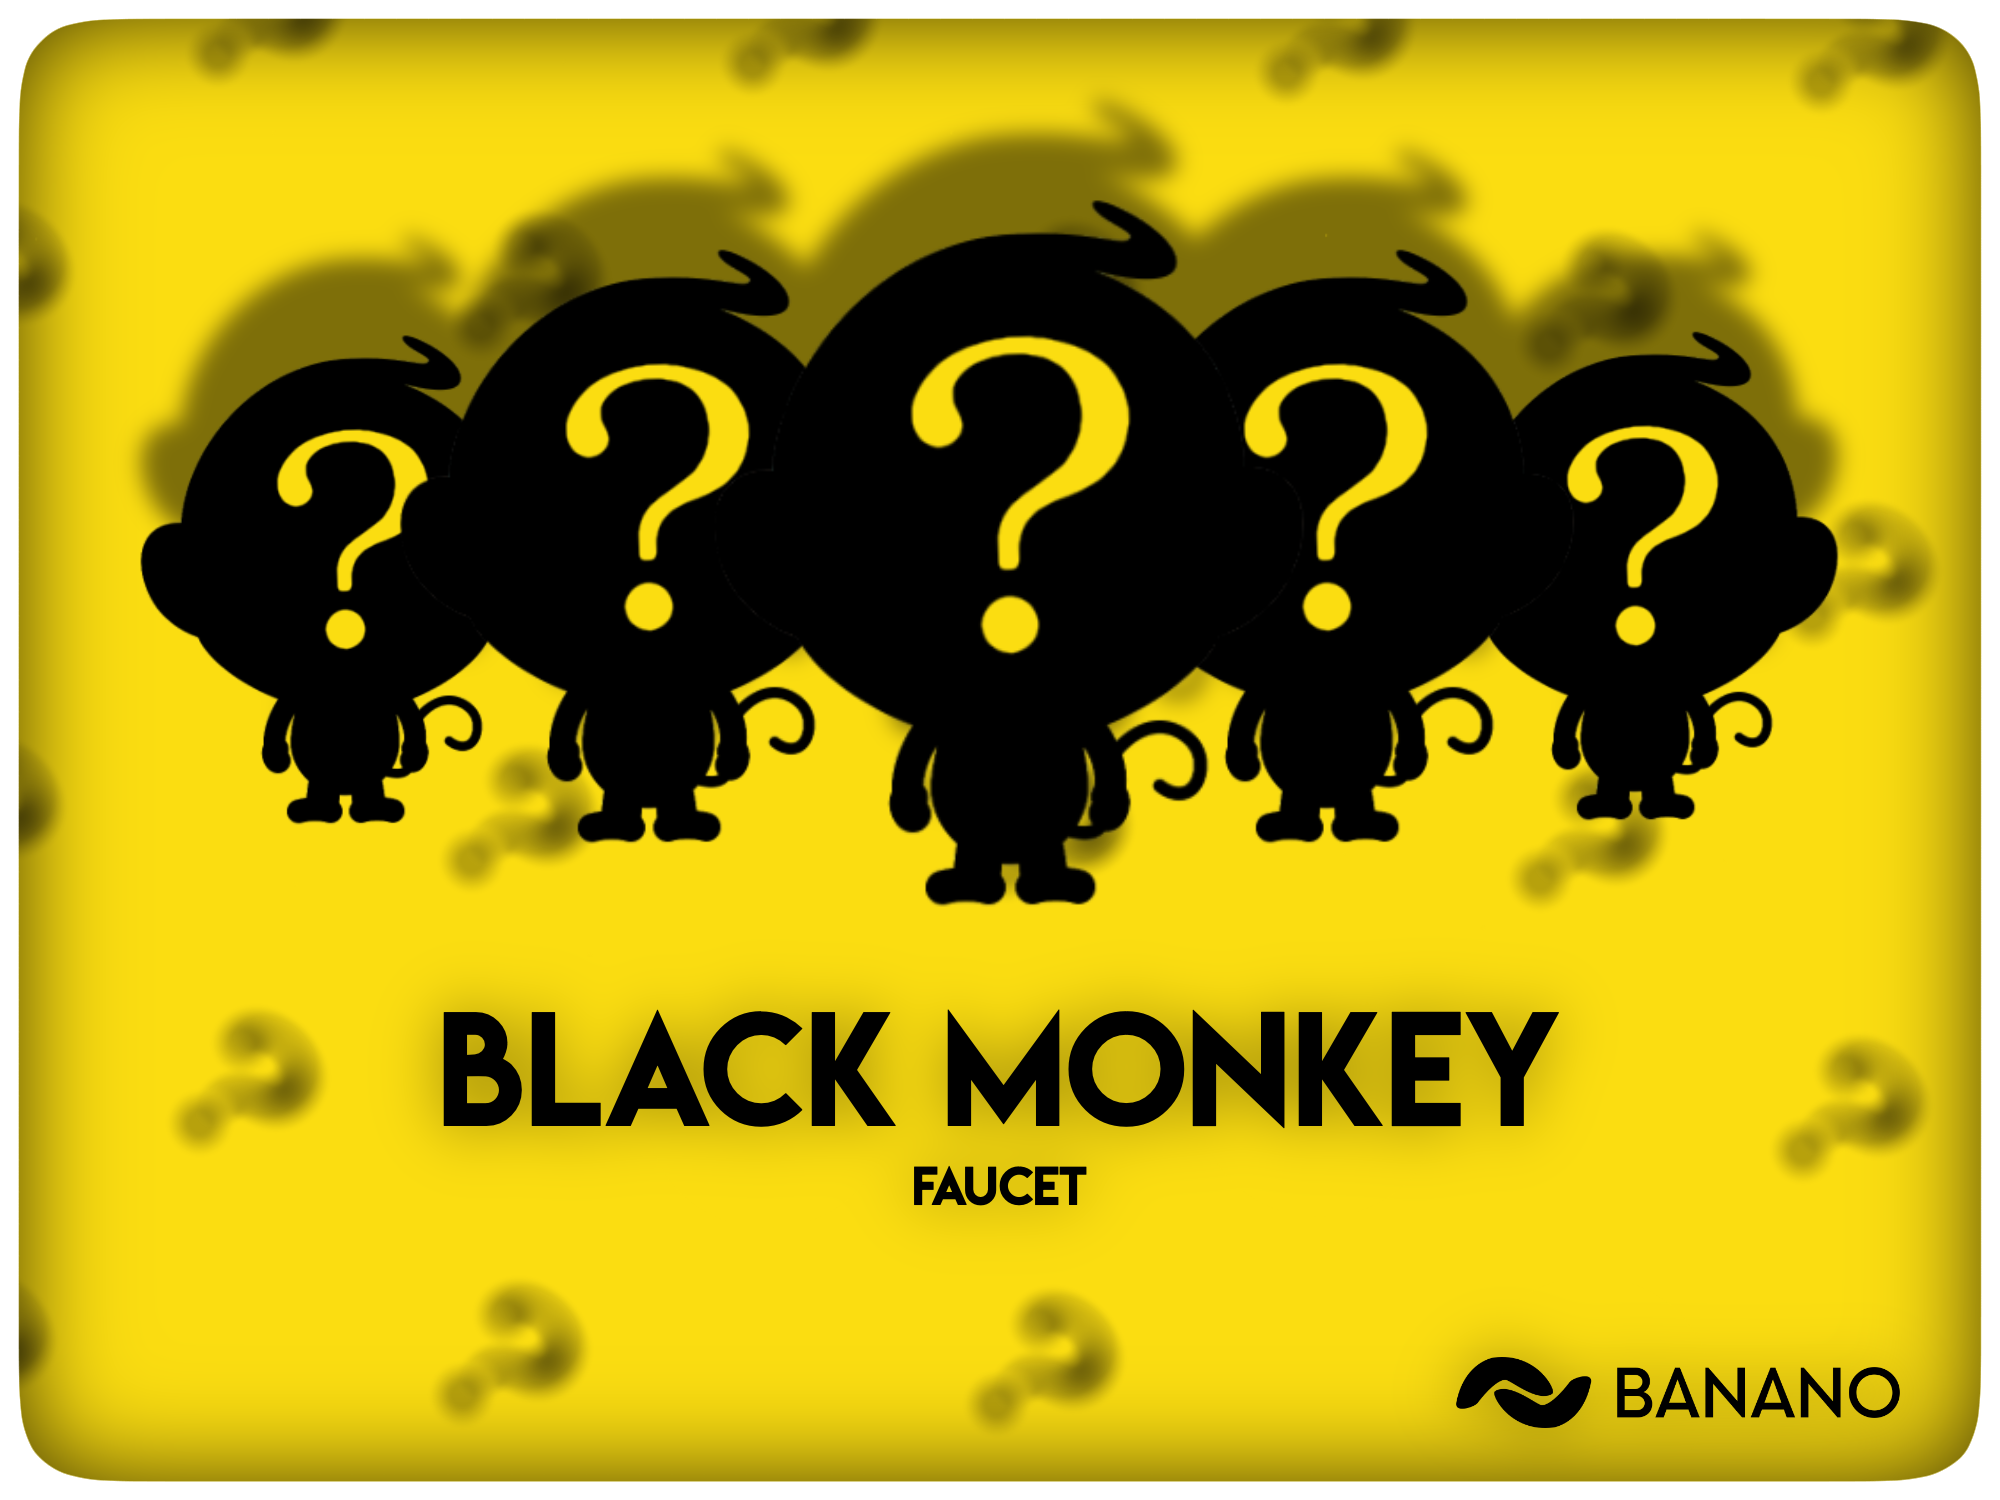 Get Free Coins by Playing BANANO’s Popular Faucet Game ‘Black Monkey’ — Round 24 Announcement